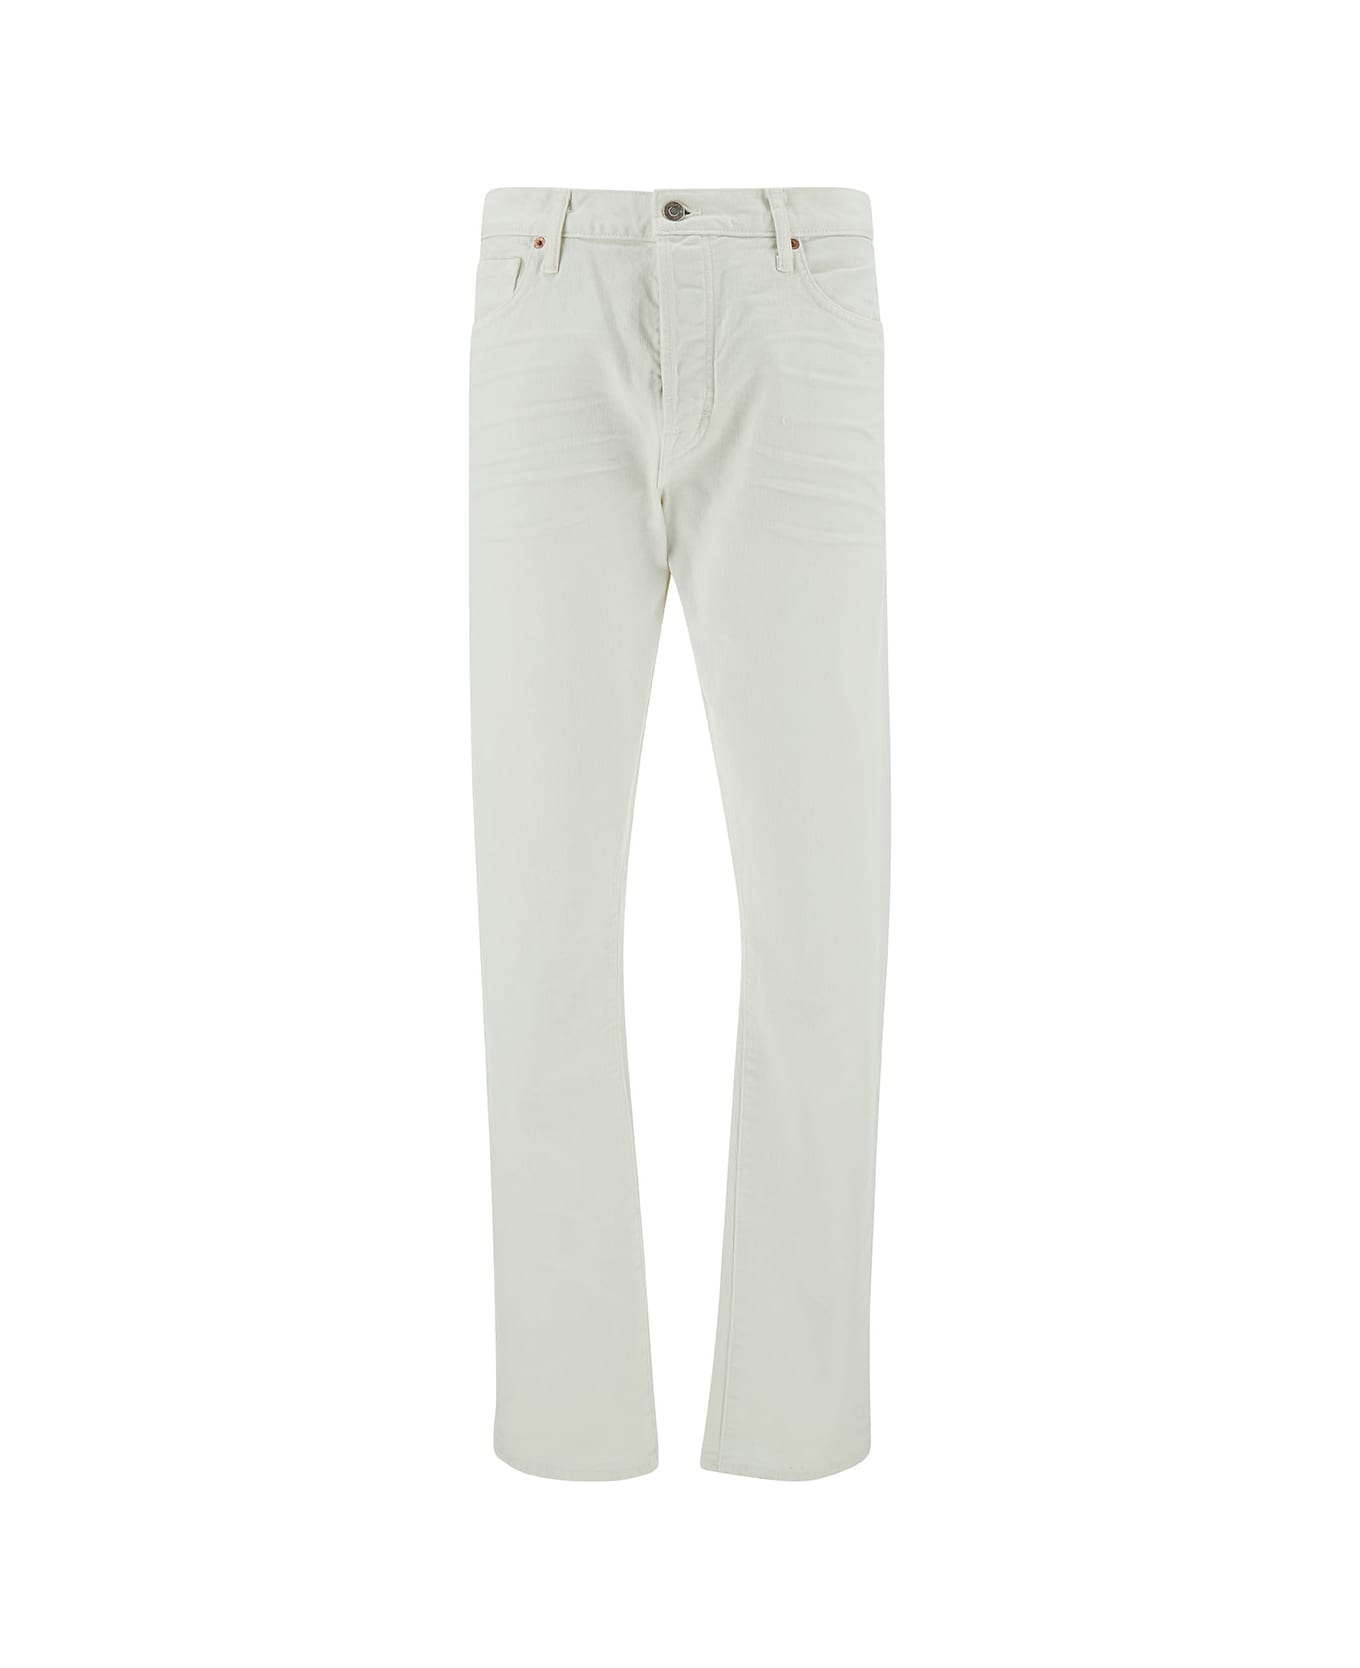 Tom Ford White Slim Five-pocket Style Jeans With Branded Button In Stretch Cotton Denim Man - White